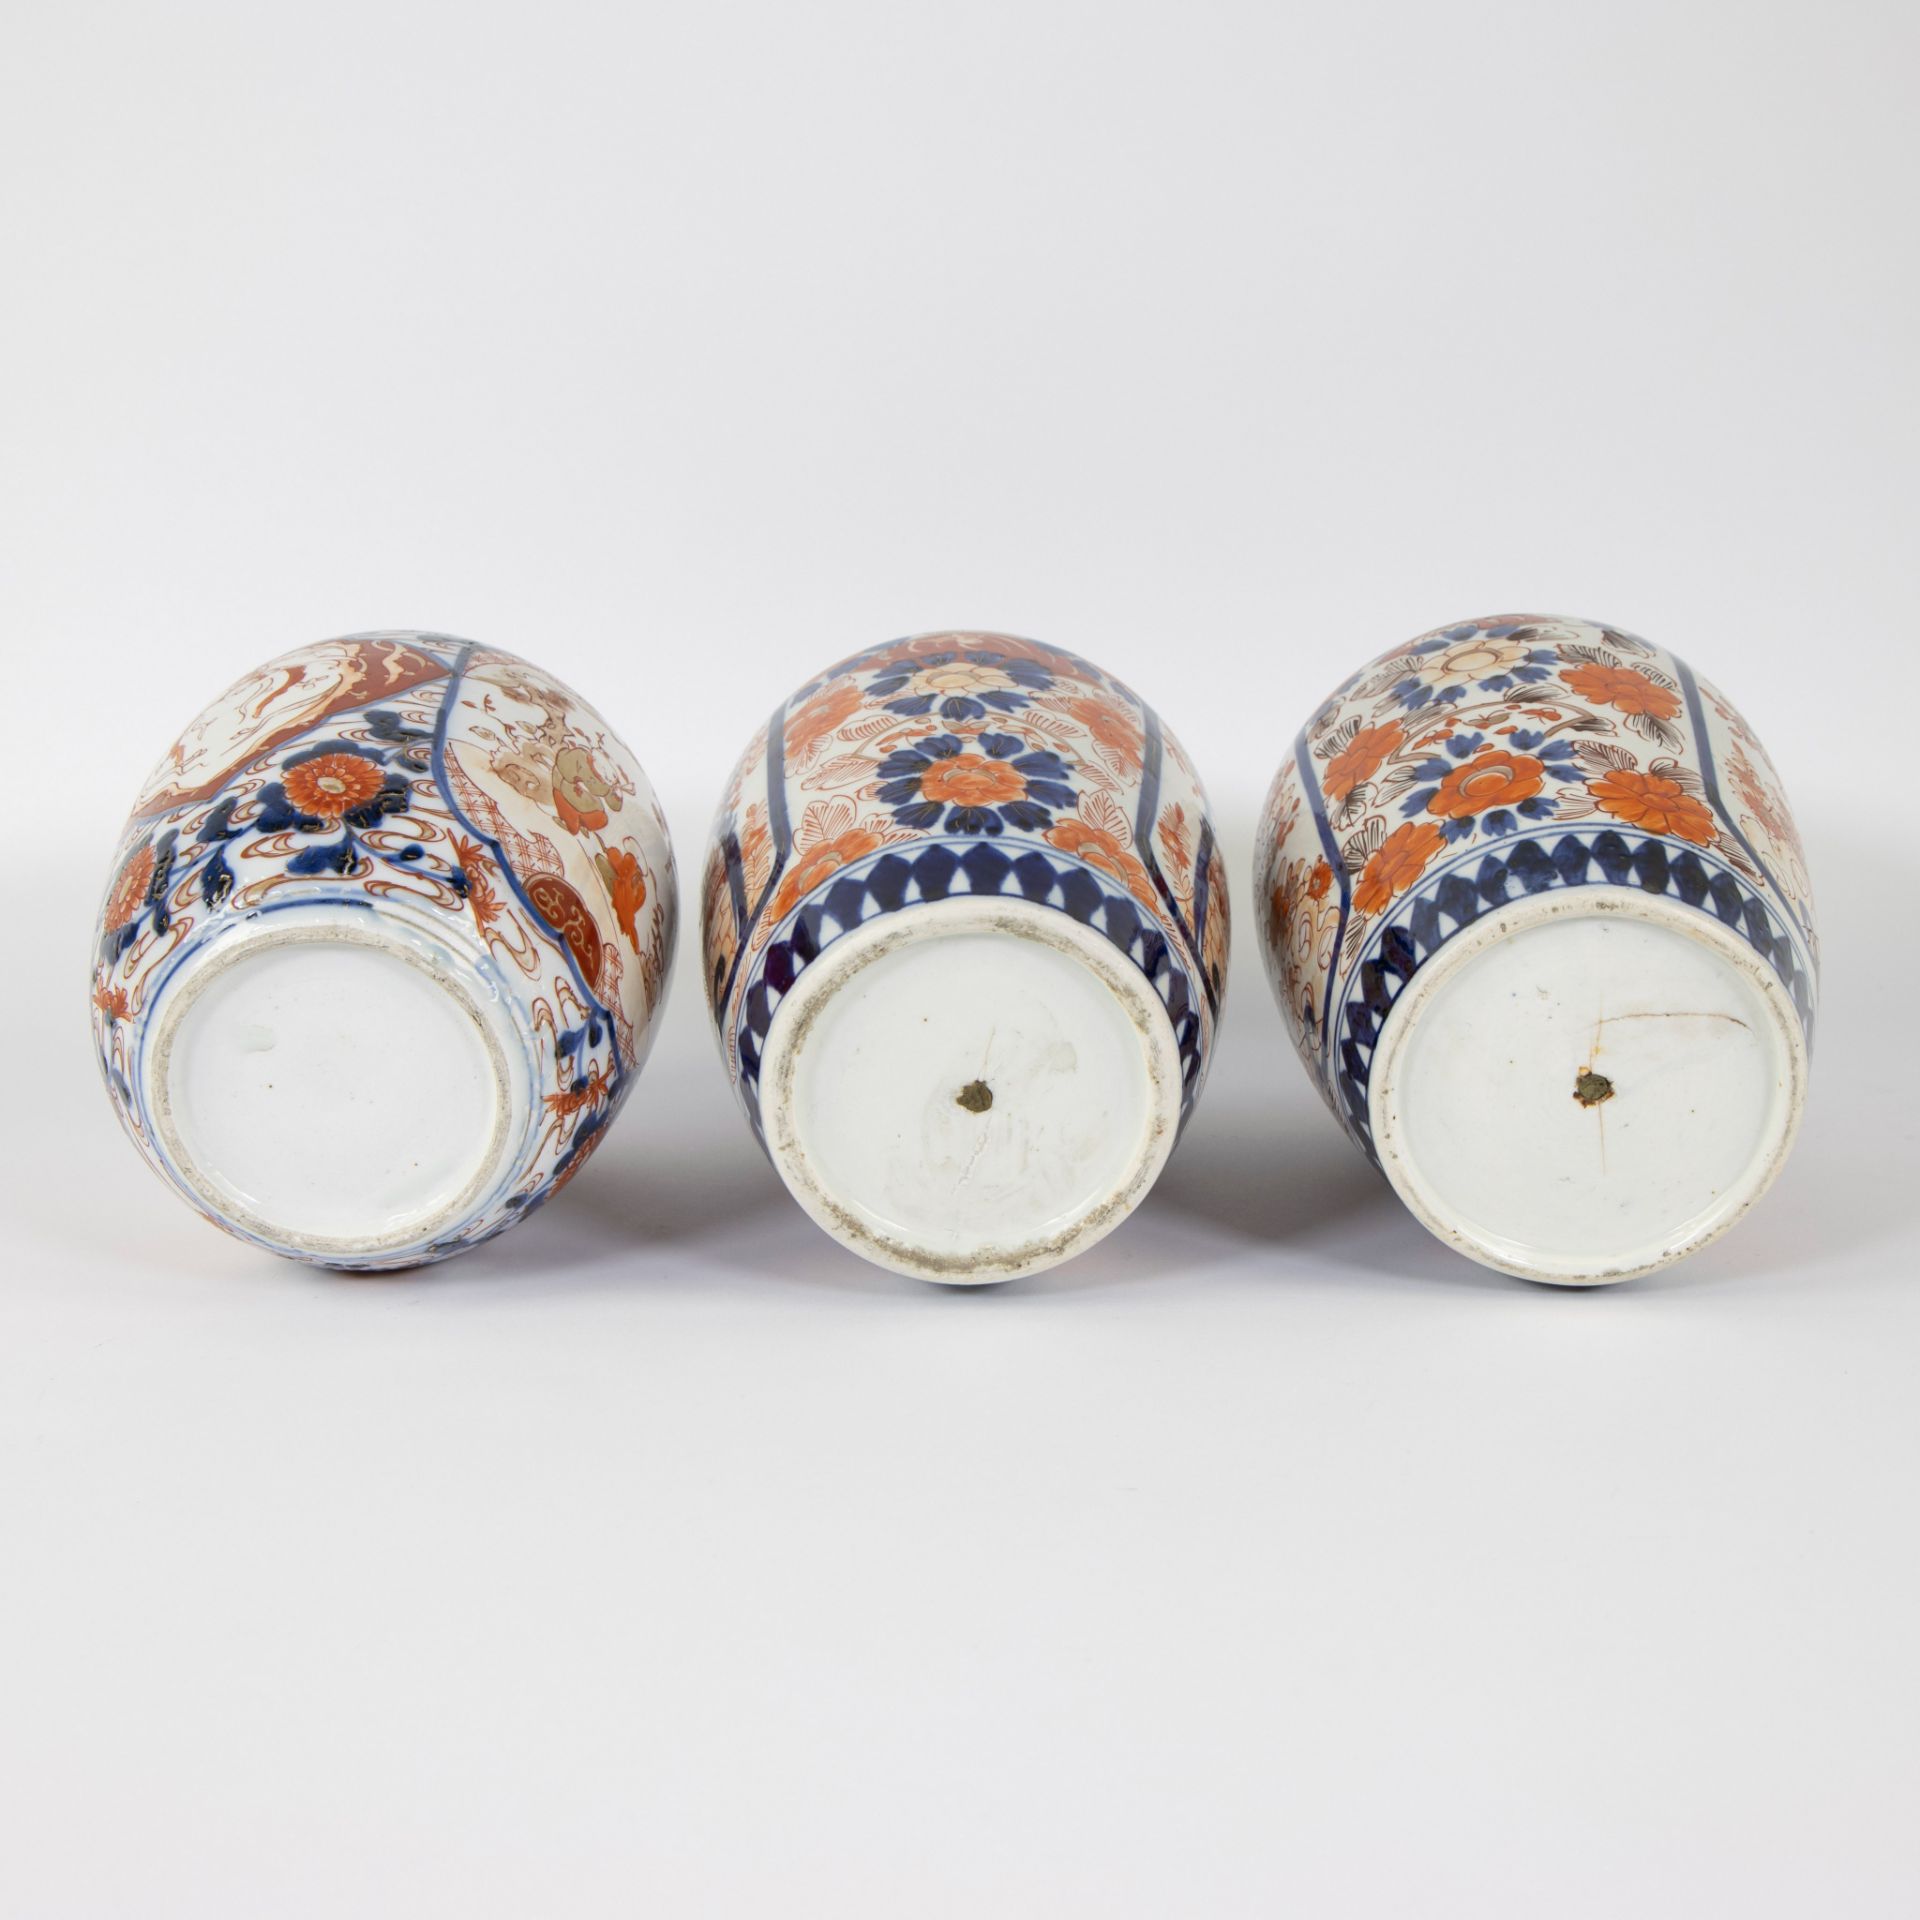 Pair of Japanese Imari lidded vases and one convex lidded vase, 19th century - Image 5 of 6